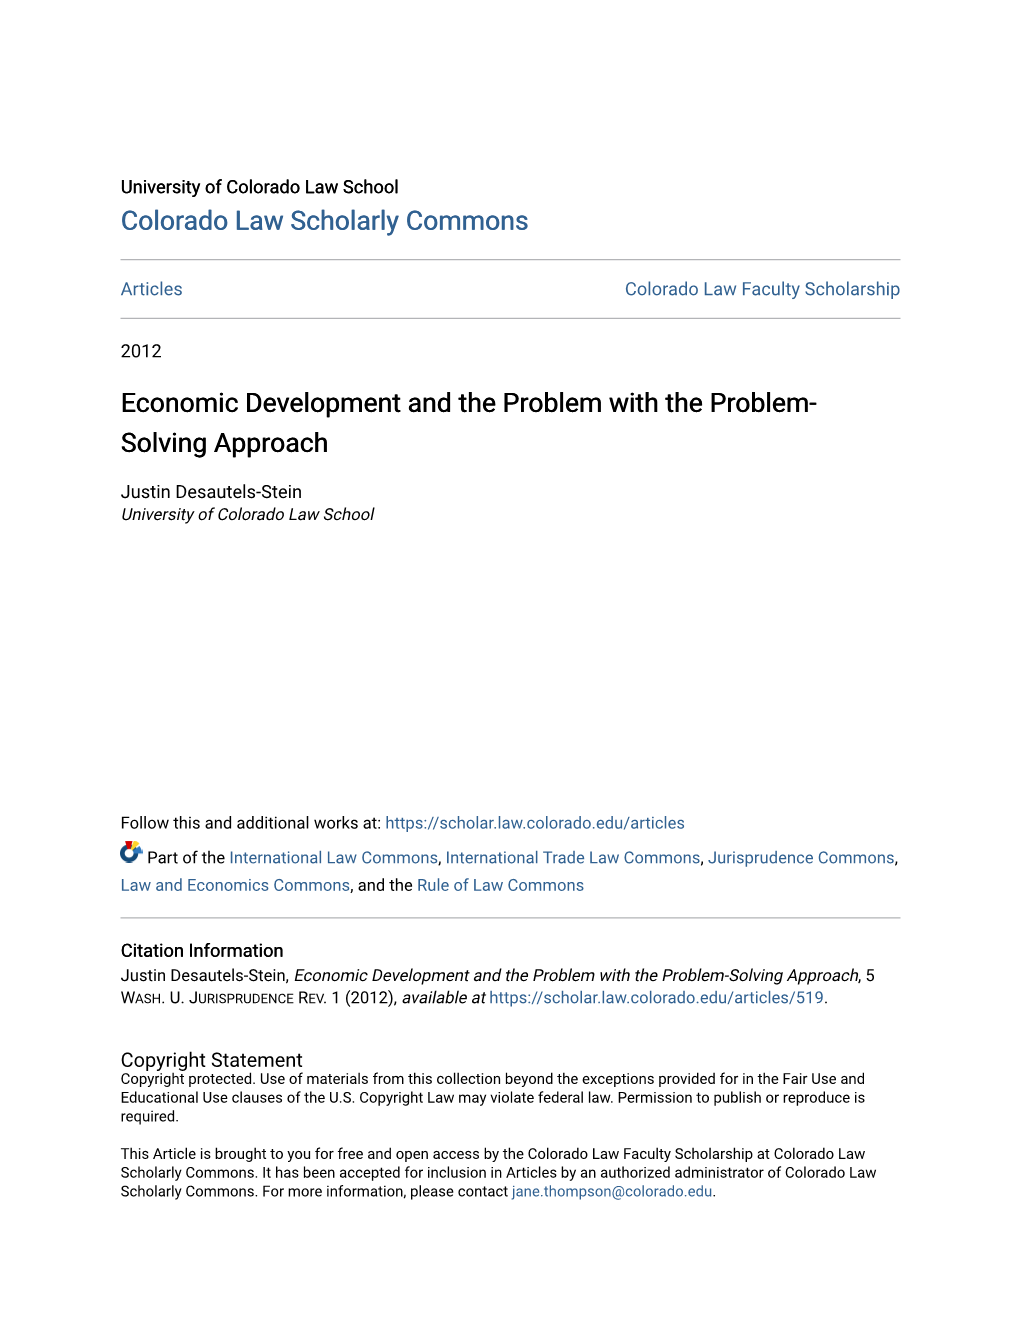 Economic Development and the Problem with the Problem-Solving Approach, 5 WASH